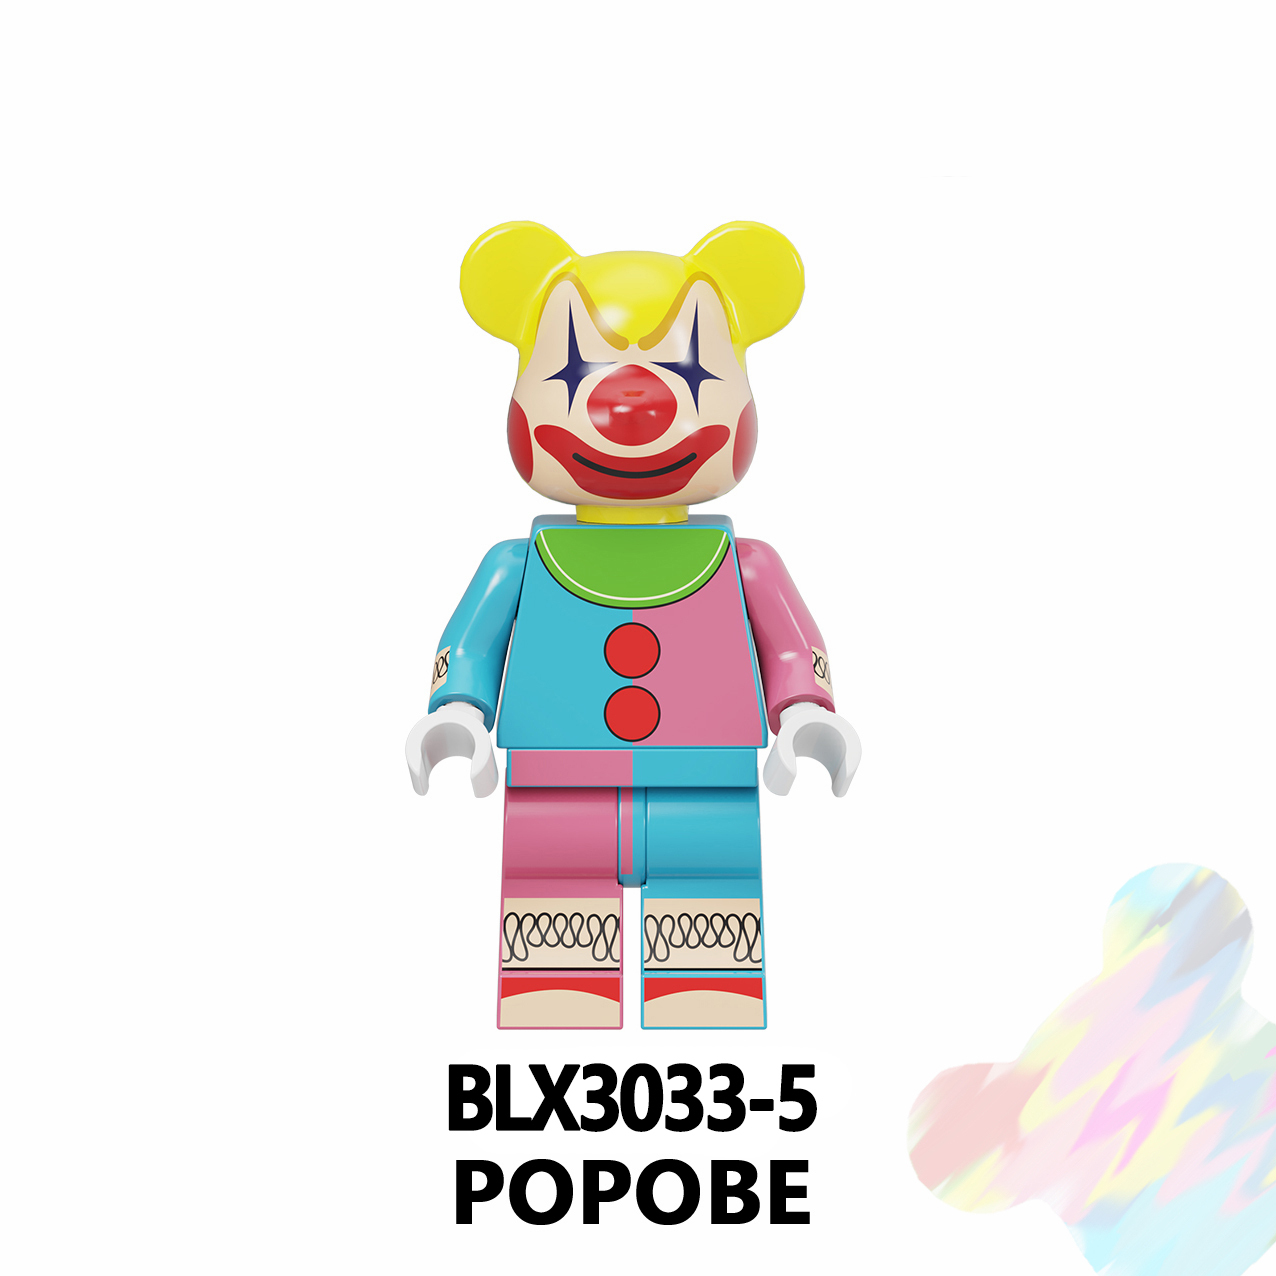 KA001 KA002 KA003 KA004 KA005 KA006 KA007 KA008 KA101 Kaws Gloomy Bear Popobe Cartoon Series Characters Toys Building Block for Kids Gifts 